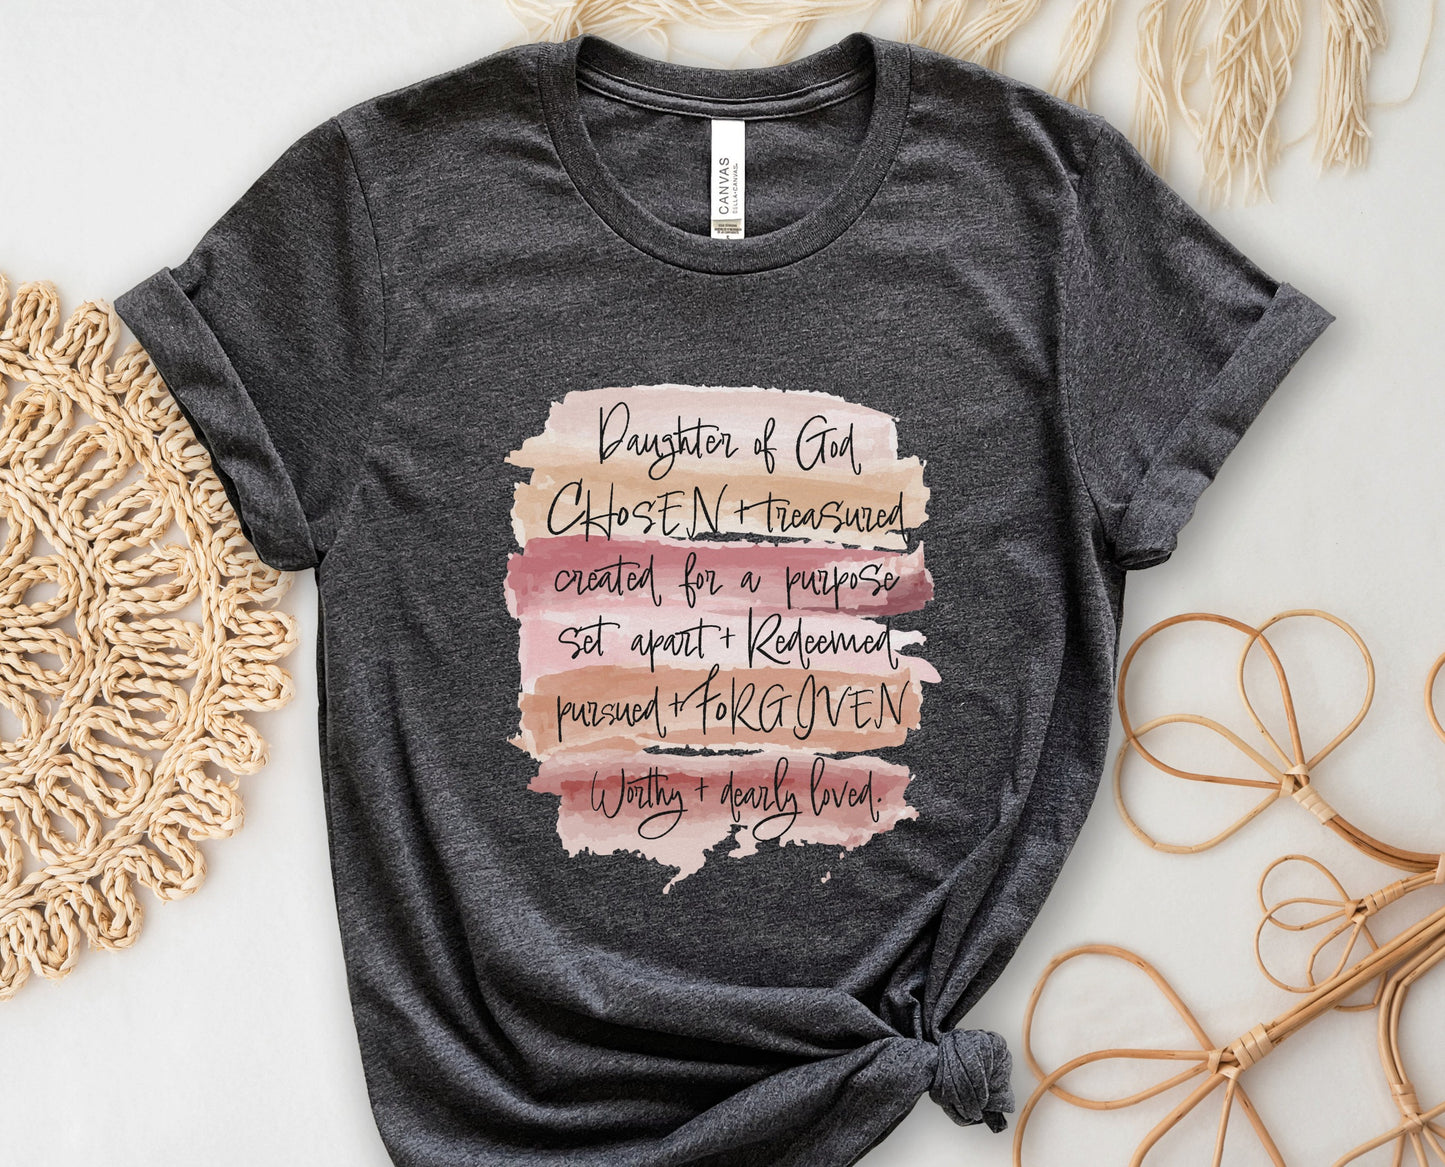 Daughter of God, Chosen, created for a purpose, redeemed, forgiven, worthy, loved, Christian woman aesthetic with neutral colors watercolor splash background printed on soft heather dark gray unisex t-shirt for women